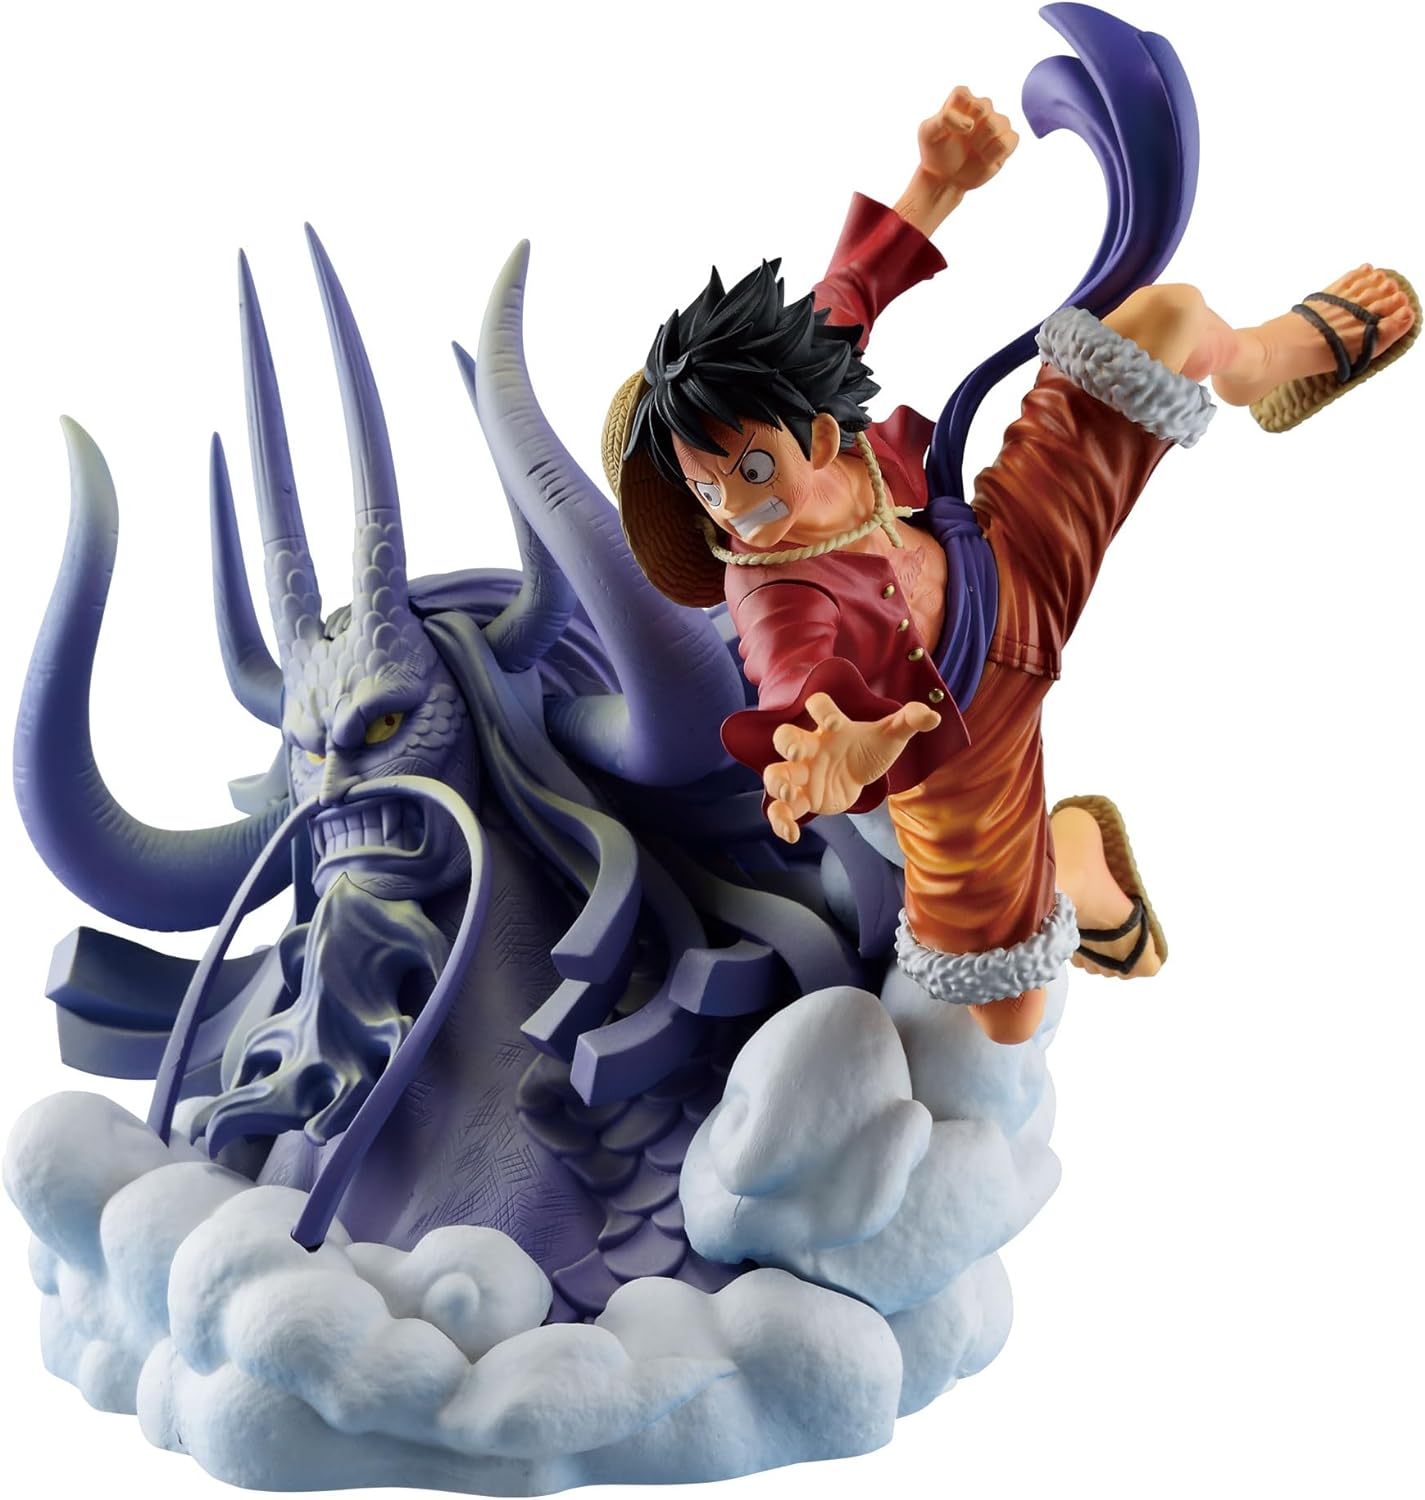 D.Luffy (The Brush) One Piece Dioramatic